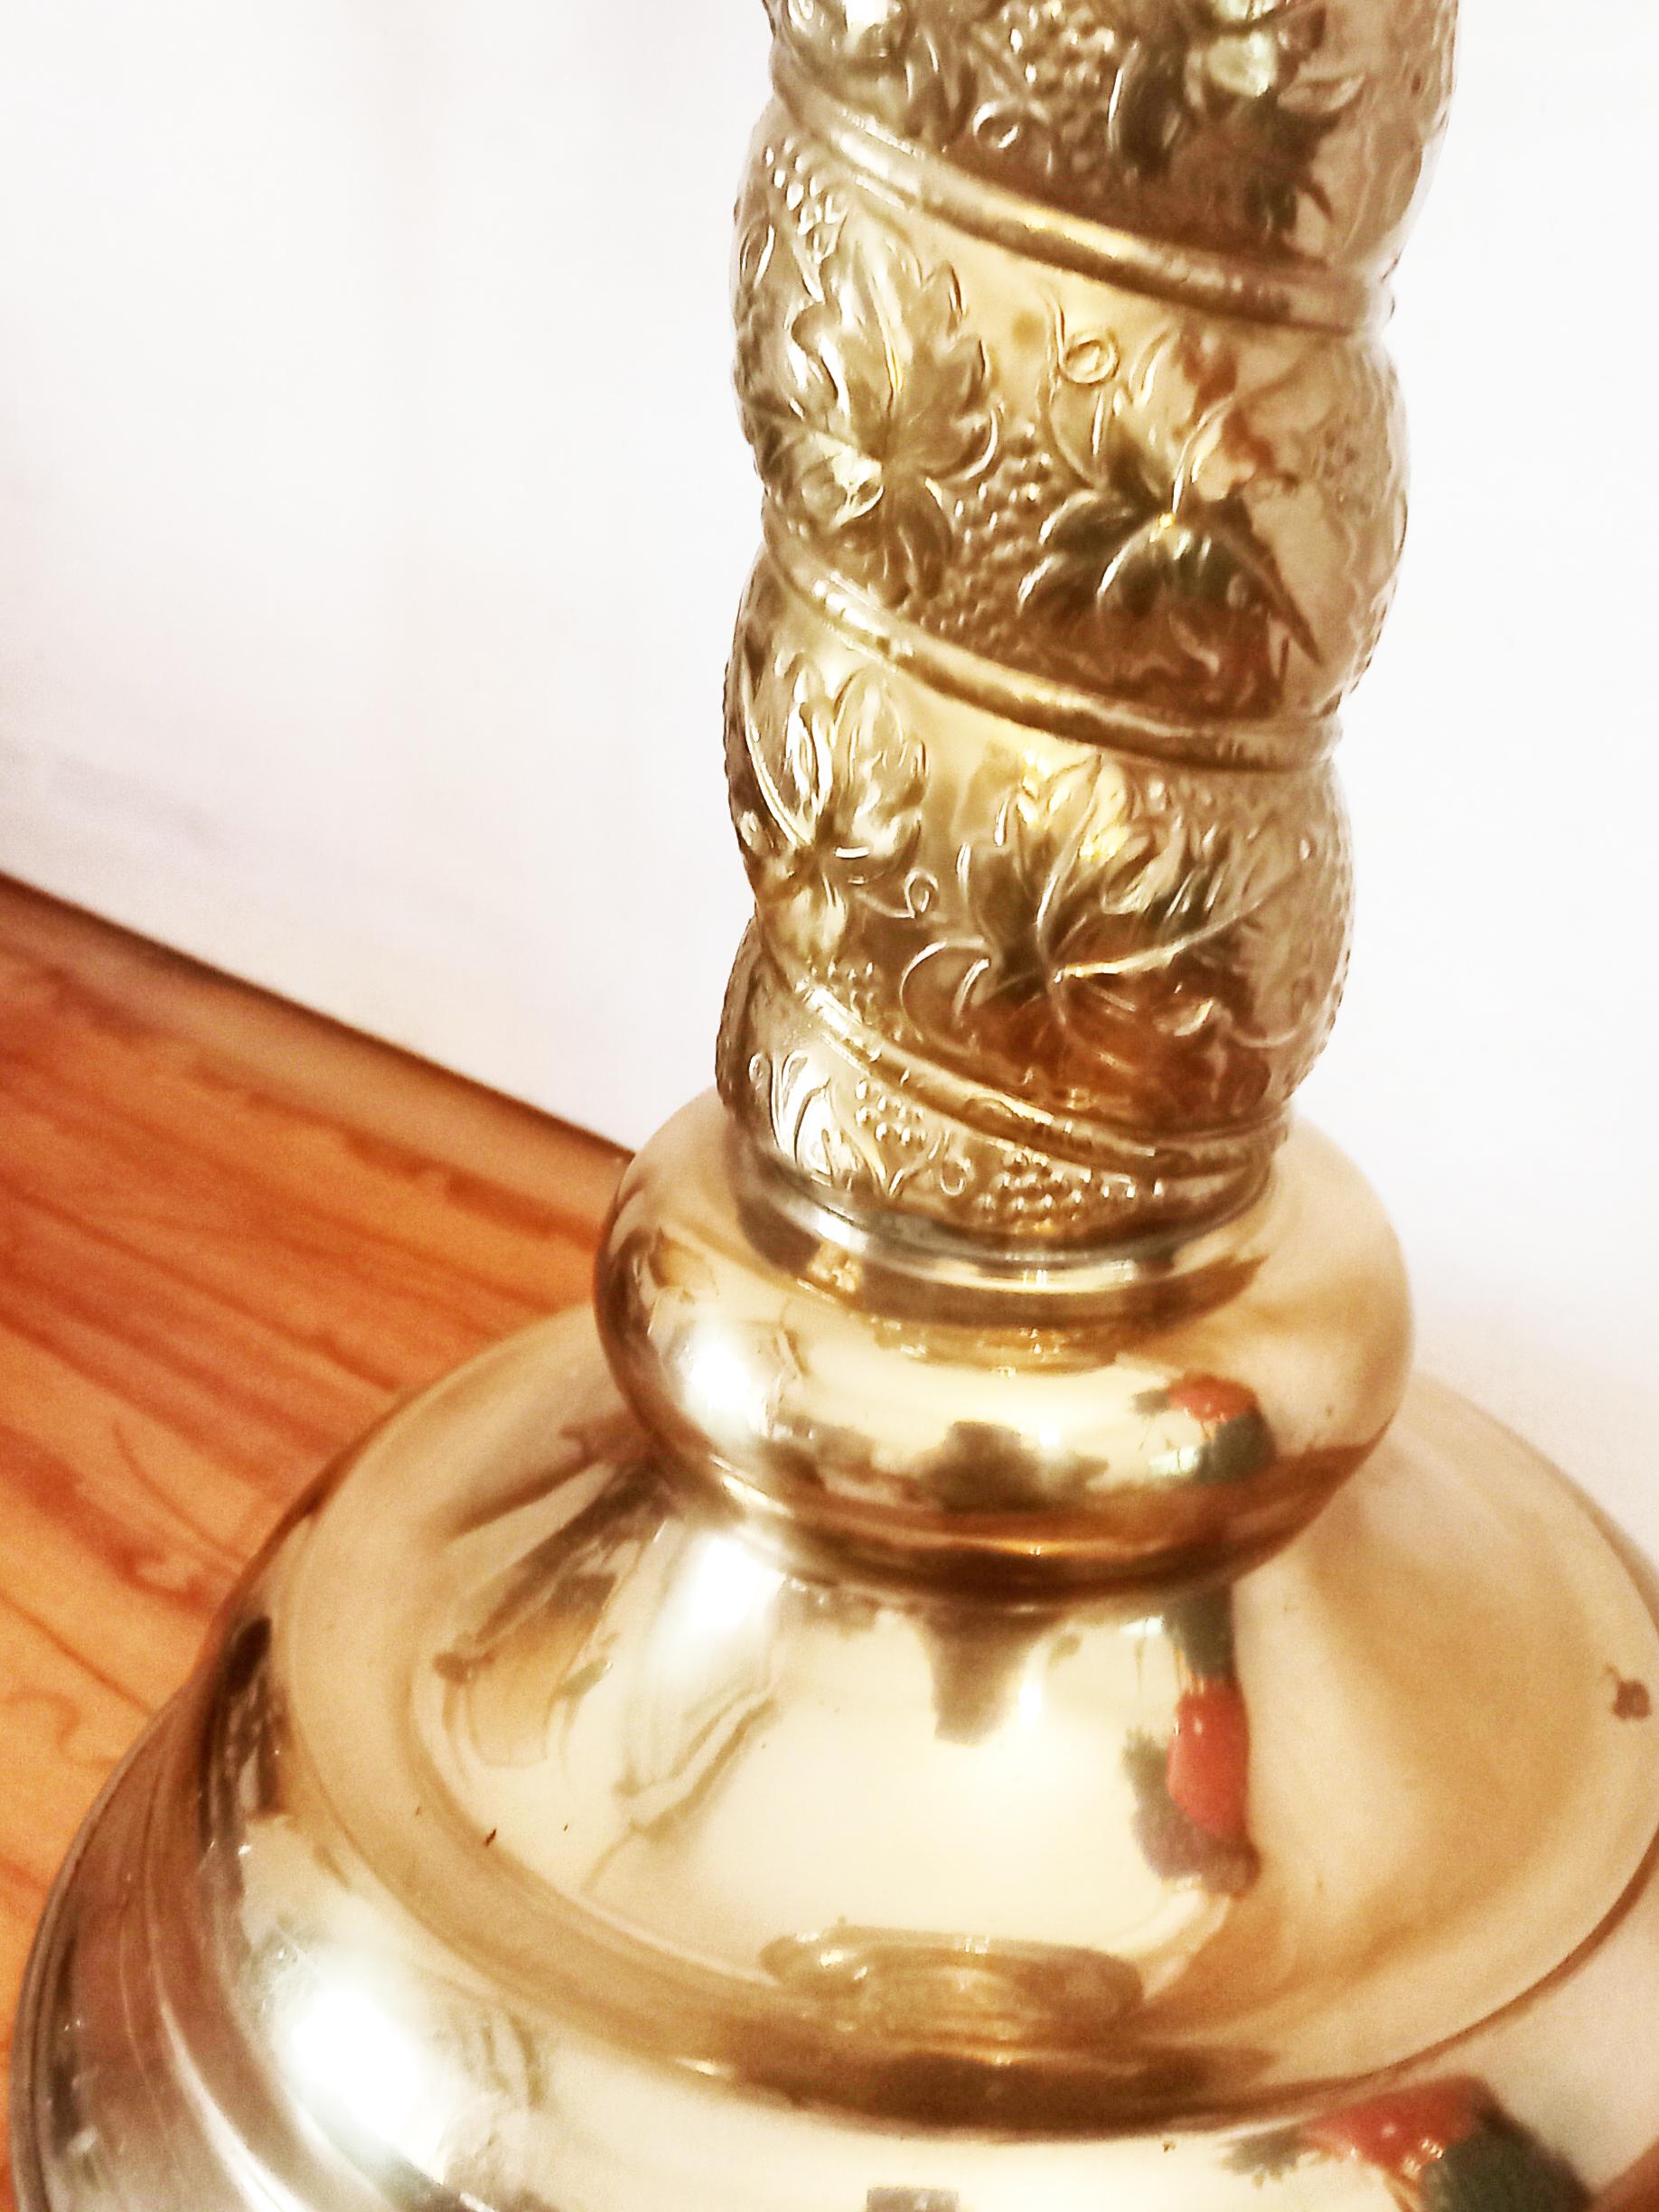 A very large, oversized brass 
Midcentury Brass Planter Solomonic Column  Grapes  Large Cup Form

Elegant mid century planter made of yellow brass in the shape of a large  whit
Solomonic Column column

It is perfect to put a large flowerpot or a